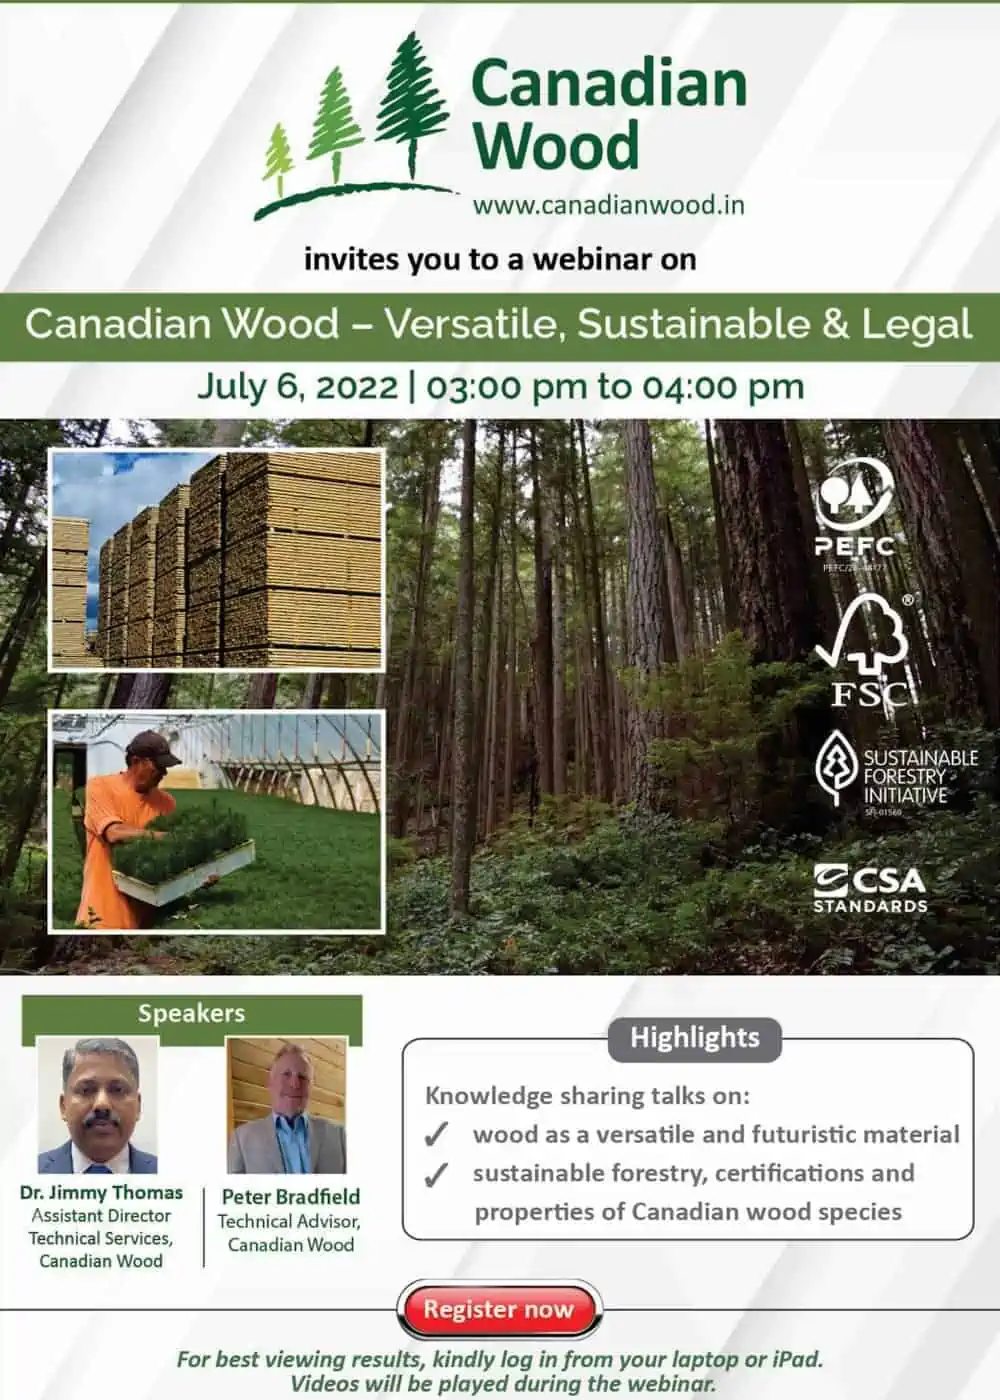 Candian Wood's webinar on lumber industry in India & procurement of sustainable wooden logs for furniture making, manufacturing & marketing on 6th july 2022